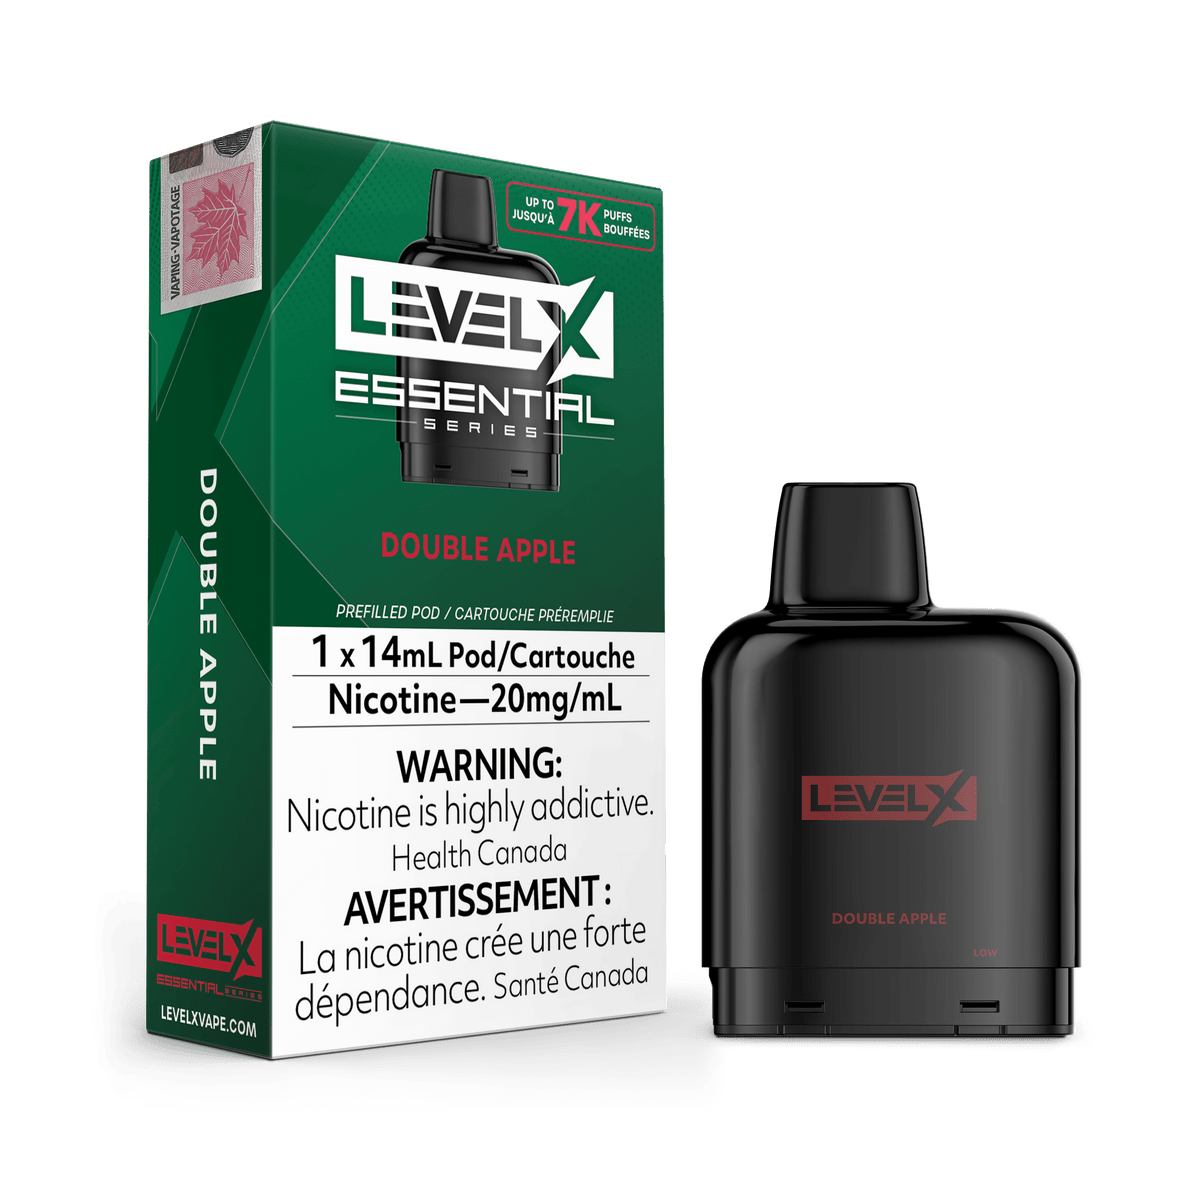 Level X Essential Series Pod - Double Apple available on Canada online vape shop